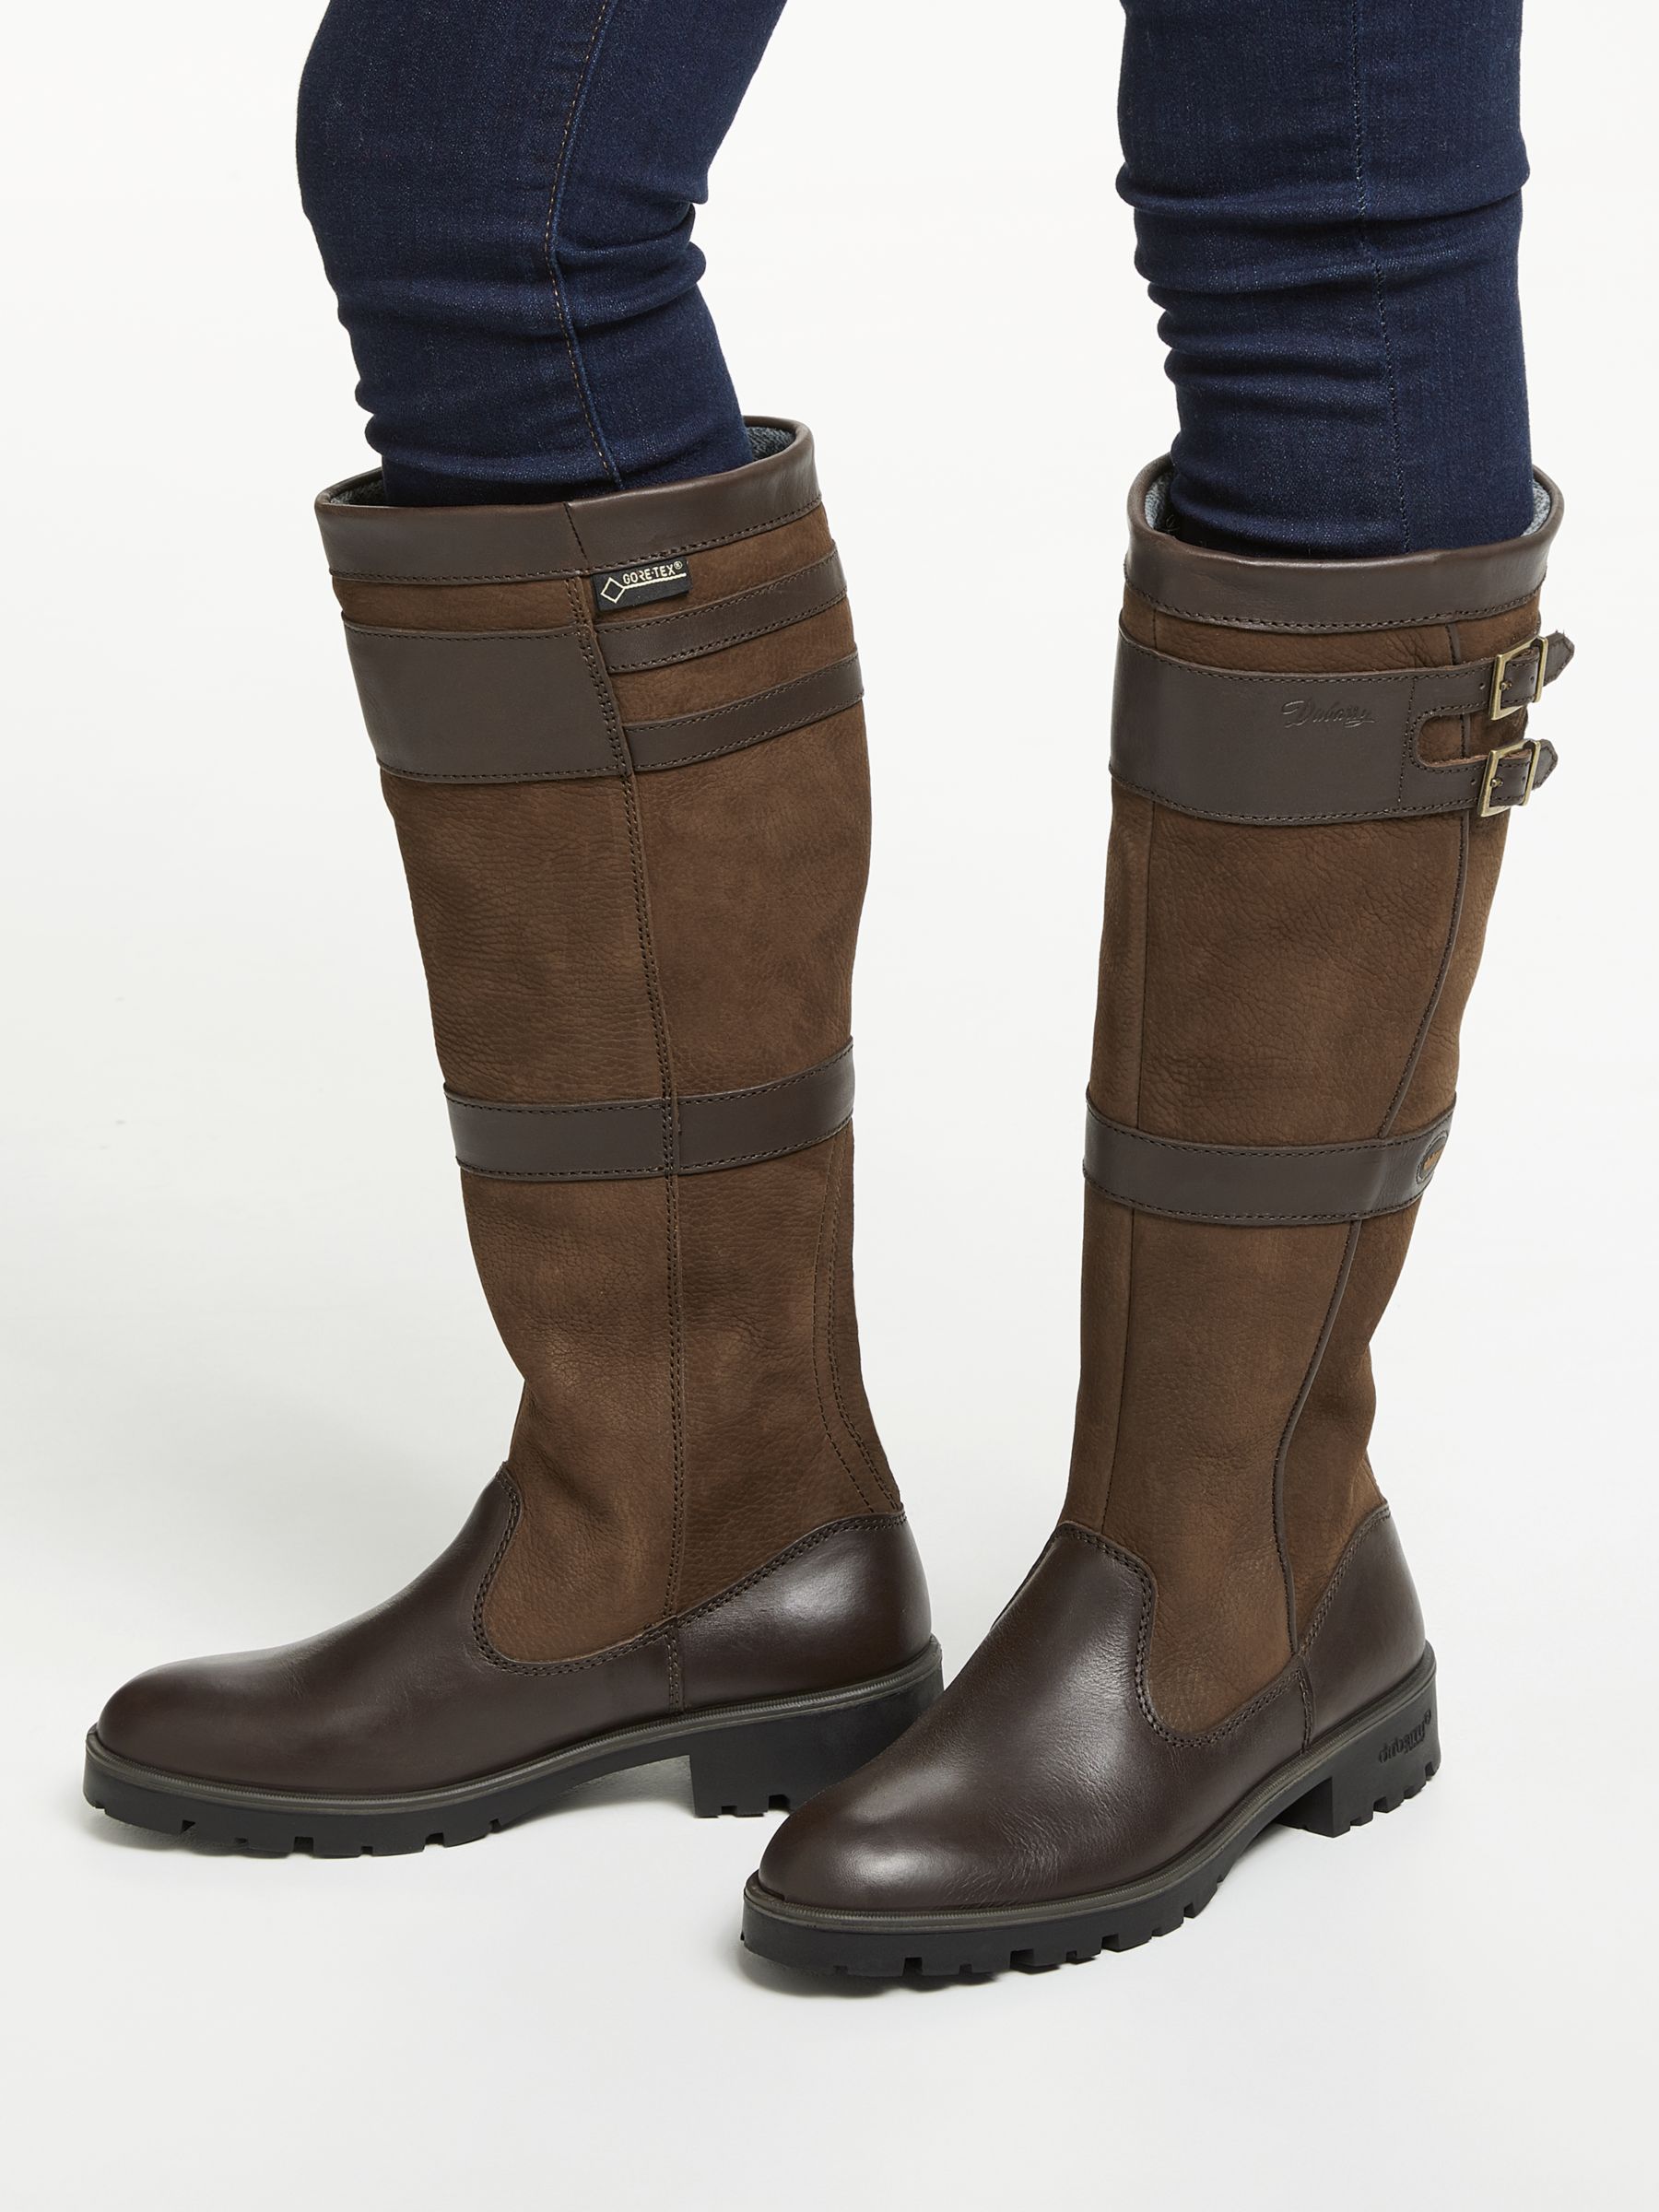 Dubarry Longford Leather Goretex Buckle Knee High Boots, Walnut at & Partners